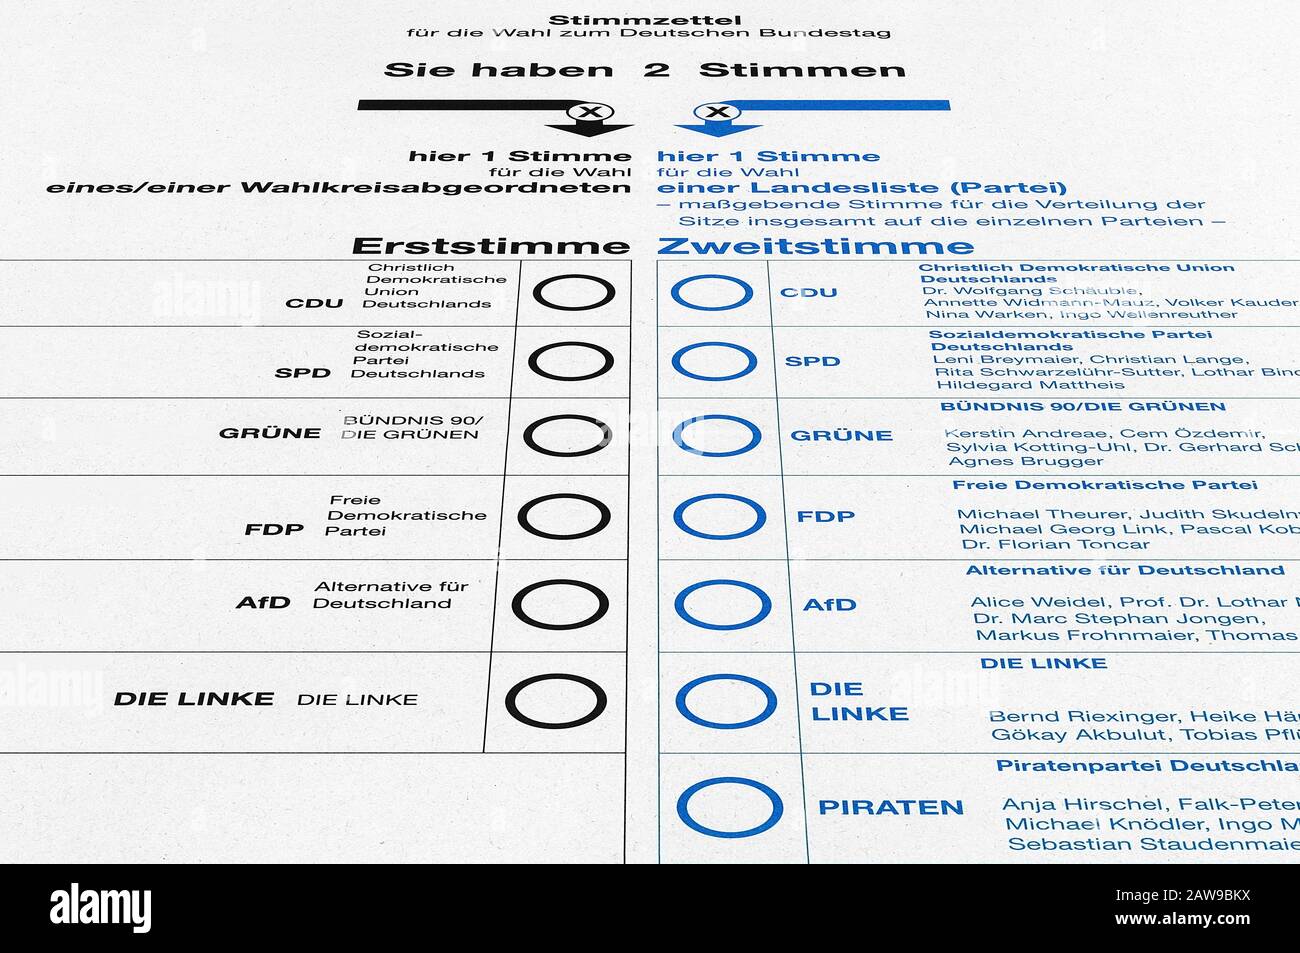 Ballot card paper for federal election / parliamentary elections (for the Bundestag) in Germany. Stock Photo